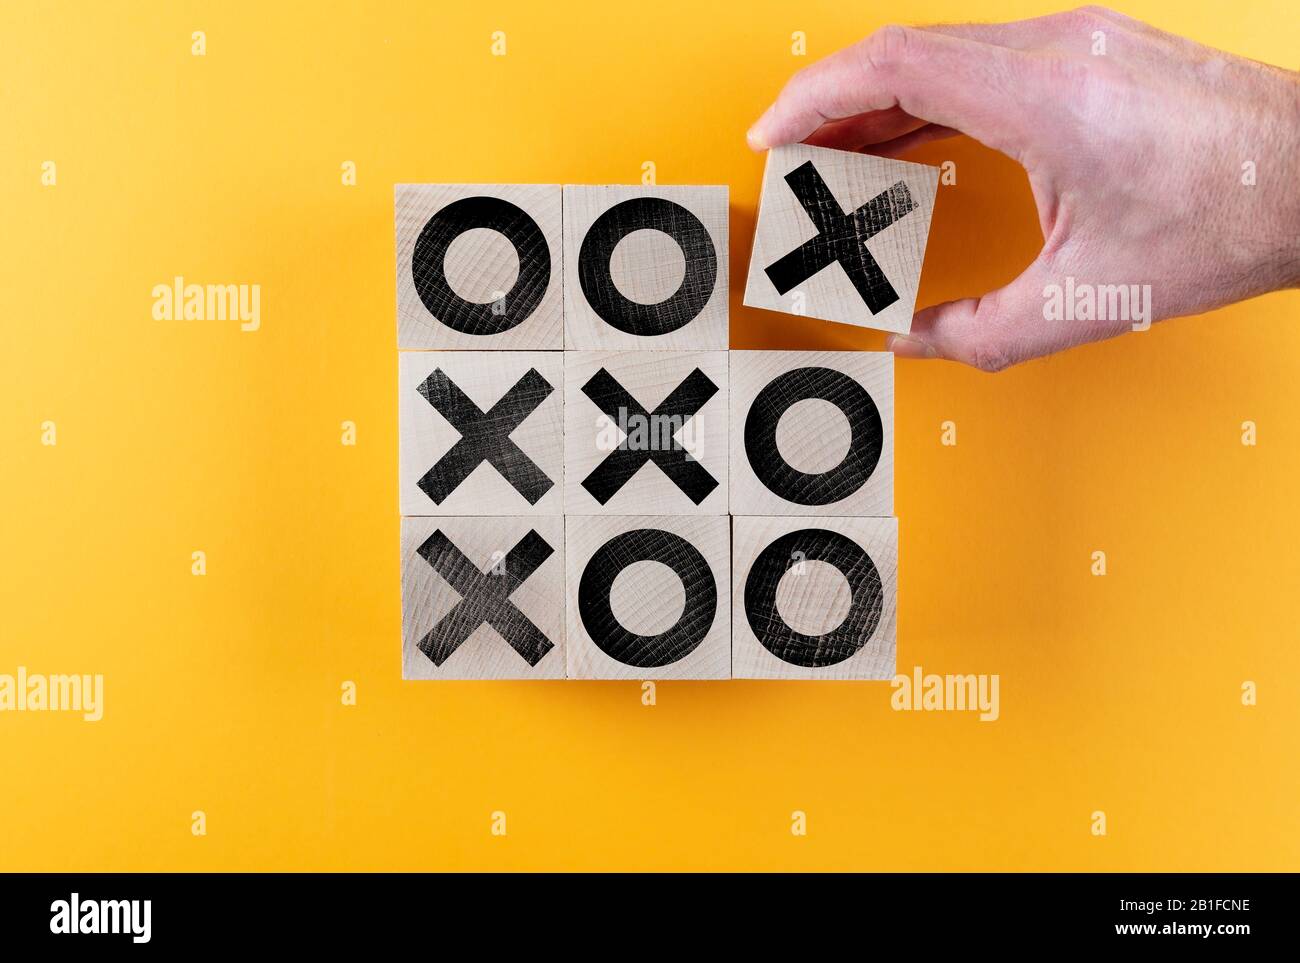 top view of tic-tac-toe game on wooden toy blocks against orange background, winning and scoring concept Stock Photo